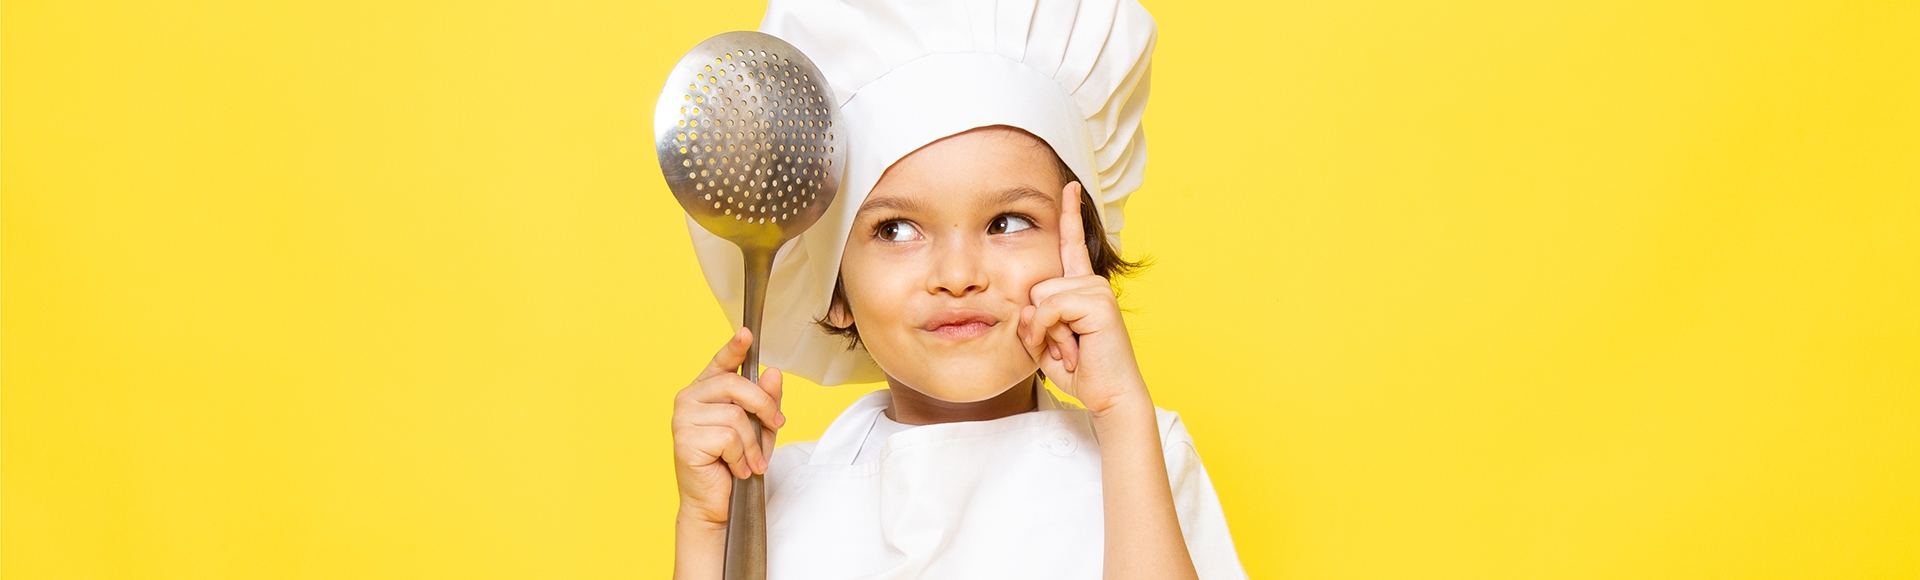 young boy wearing a chef's hat thinking about what to cook